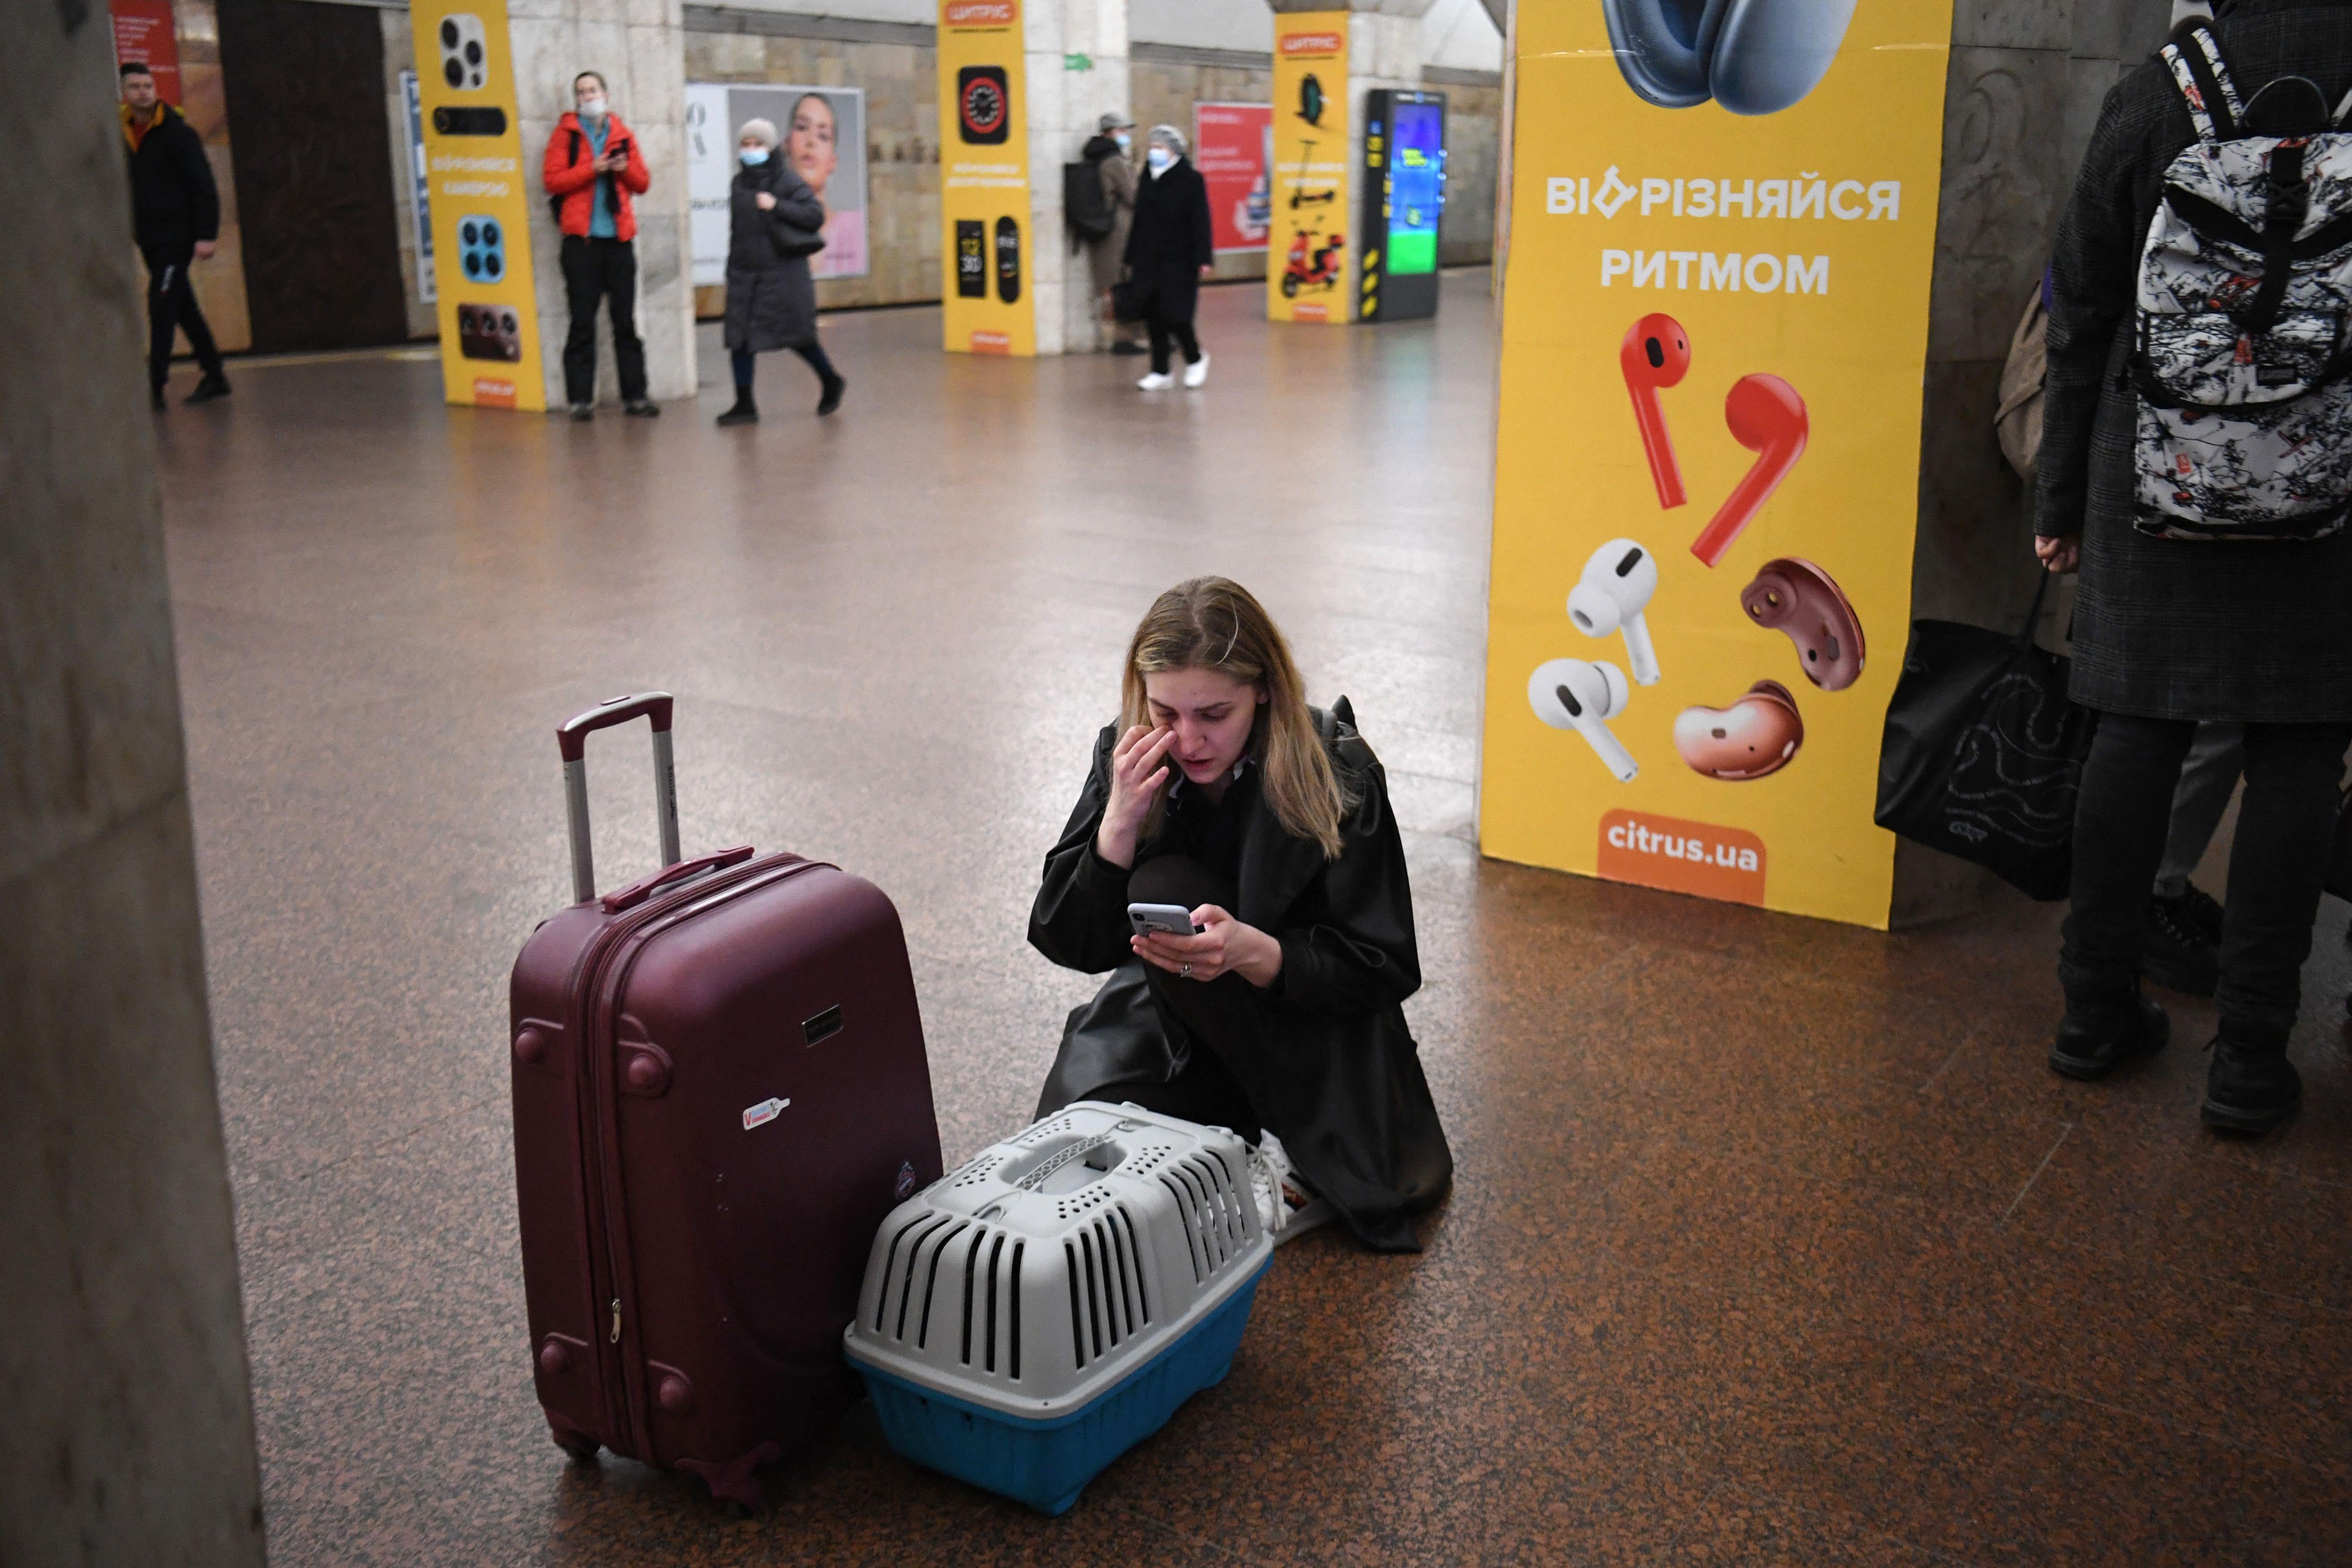 A woman in a subway station kneels on the floor in front of a suitcase and a cat carrier as she looks at her phone.